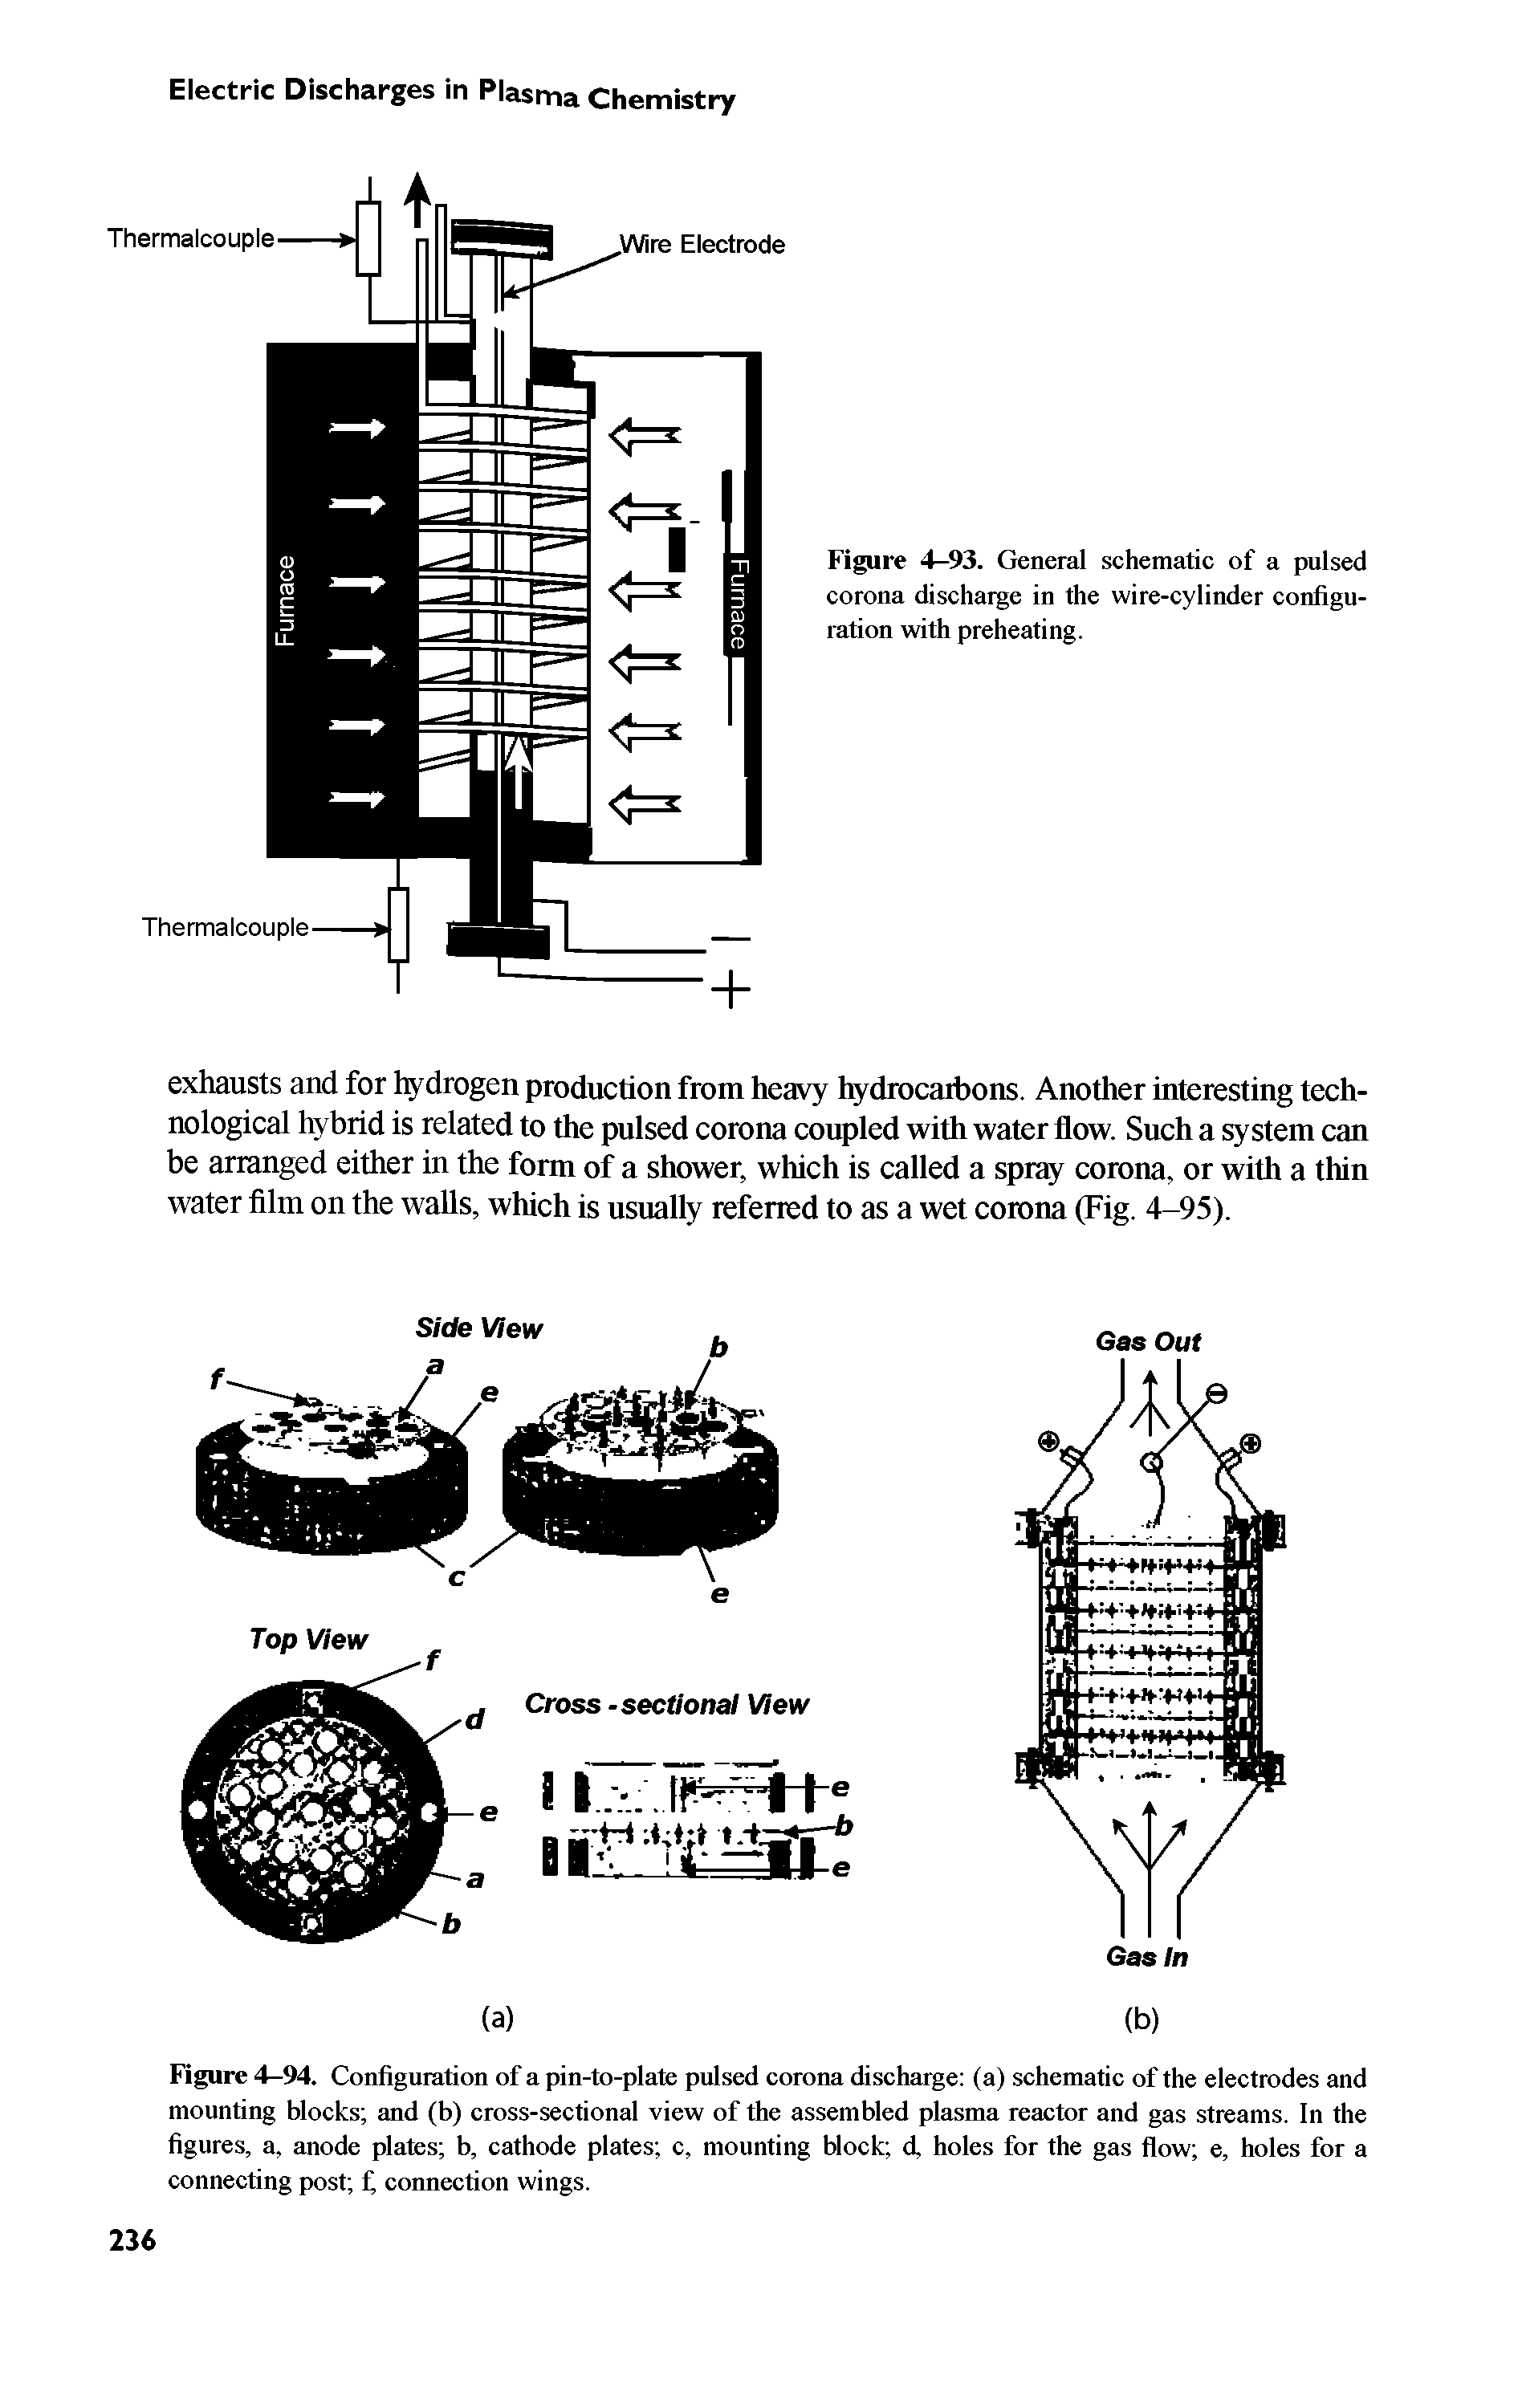 Figure 4-93. General schematie of a pulsed corona discharge in the wire-cylinder configuration with preheating.